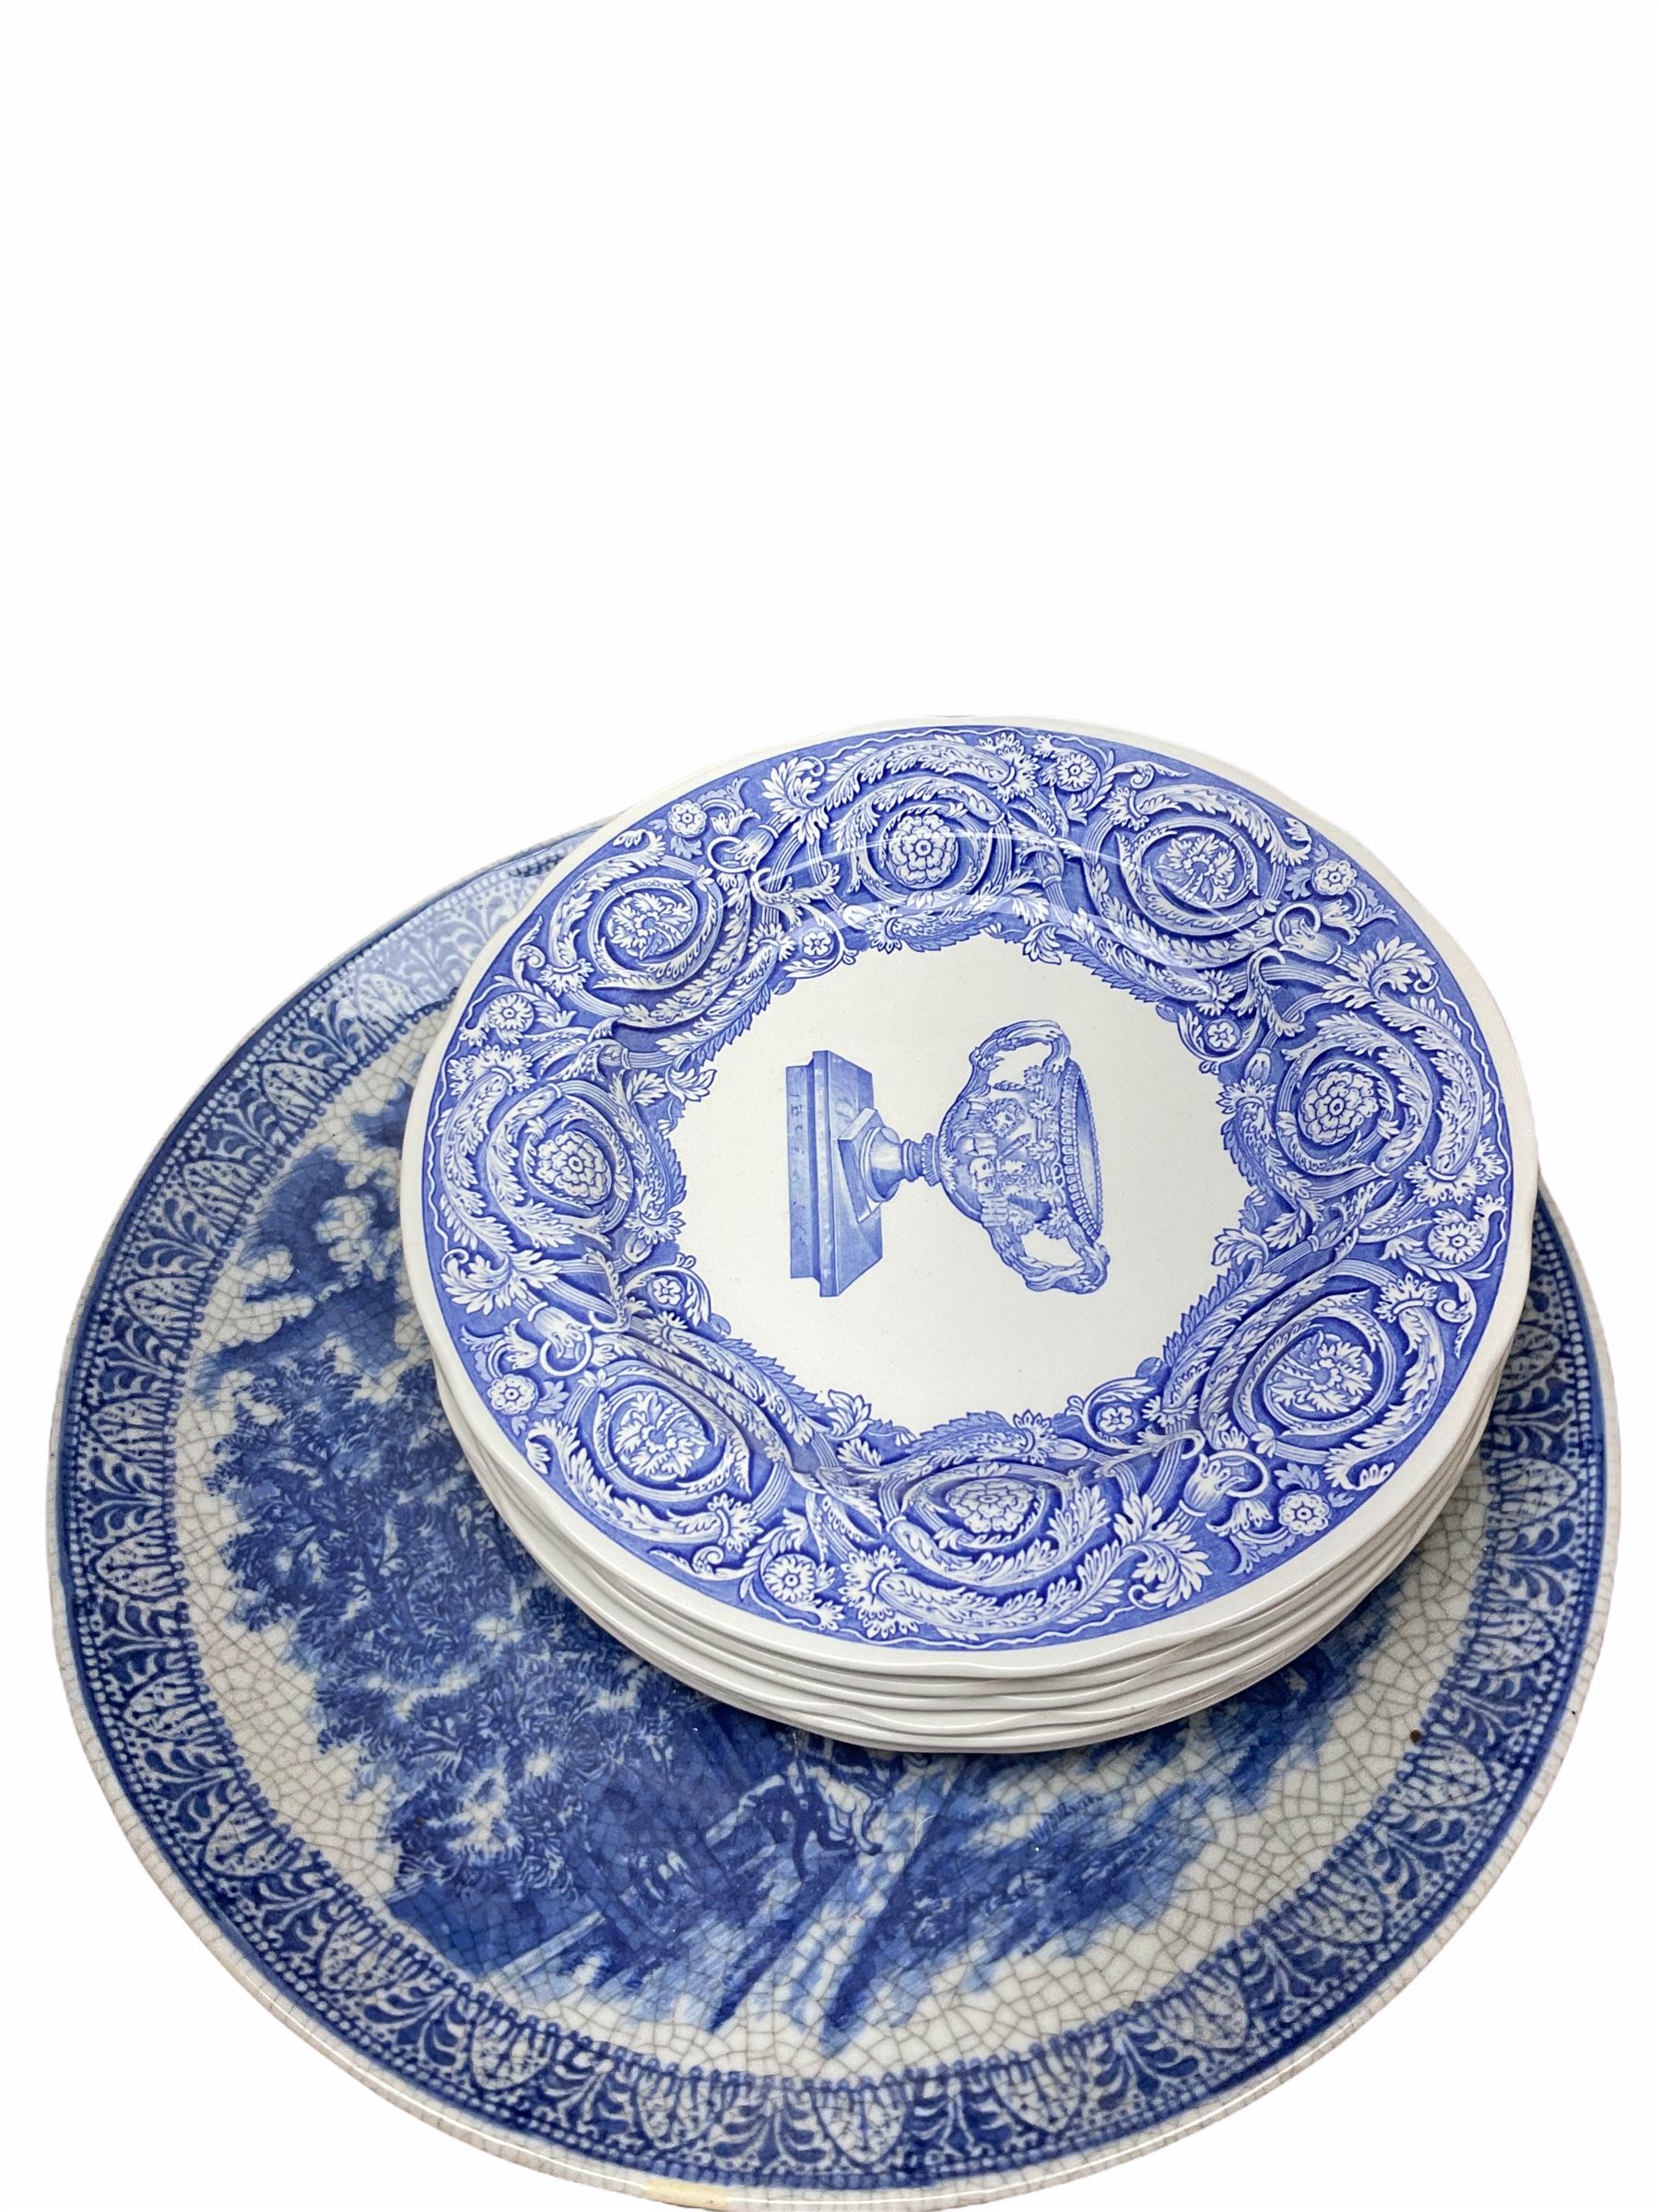 Six Spode Blue Room plates - Image 2 of 3